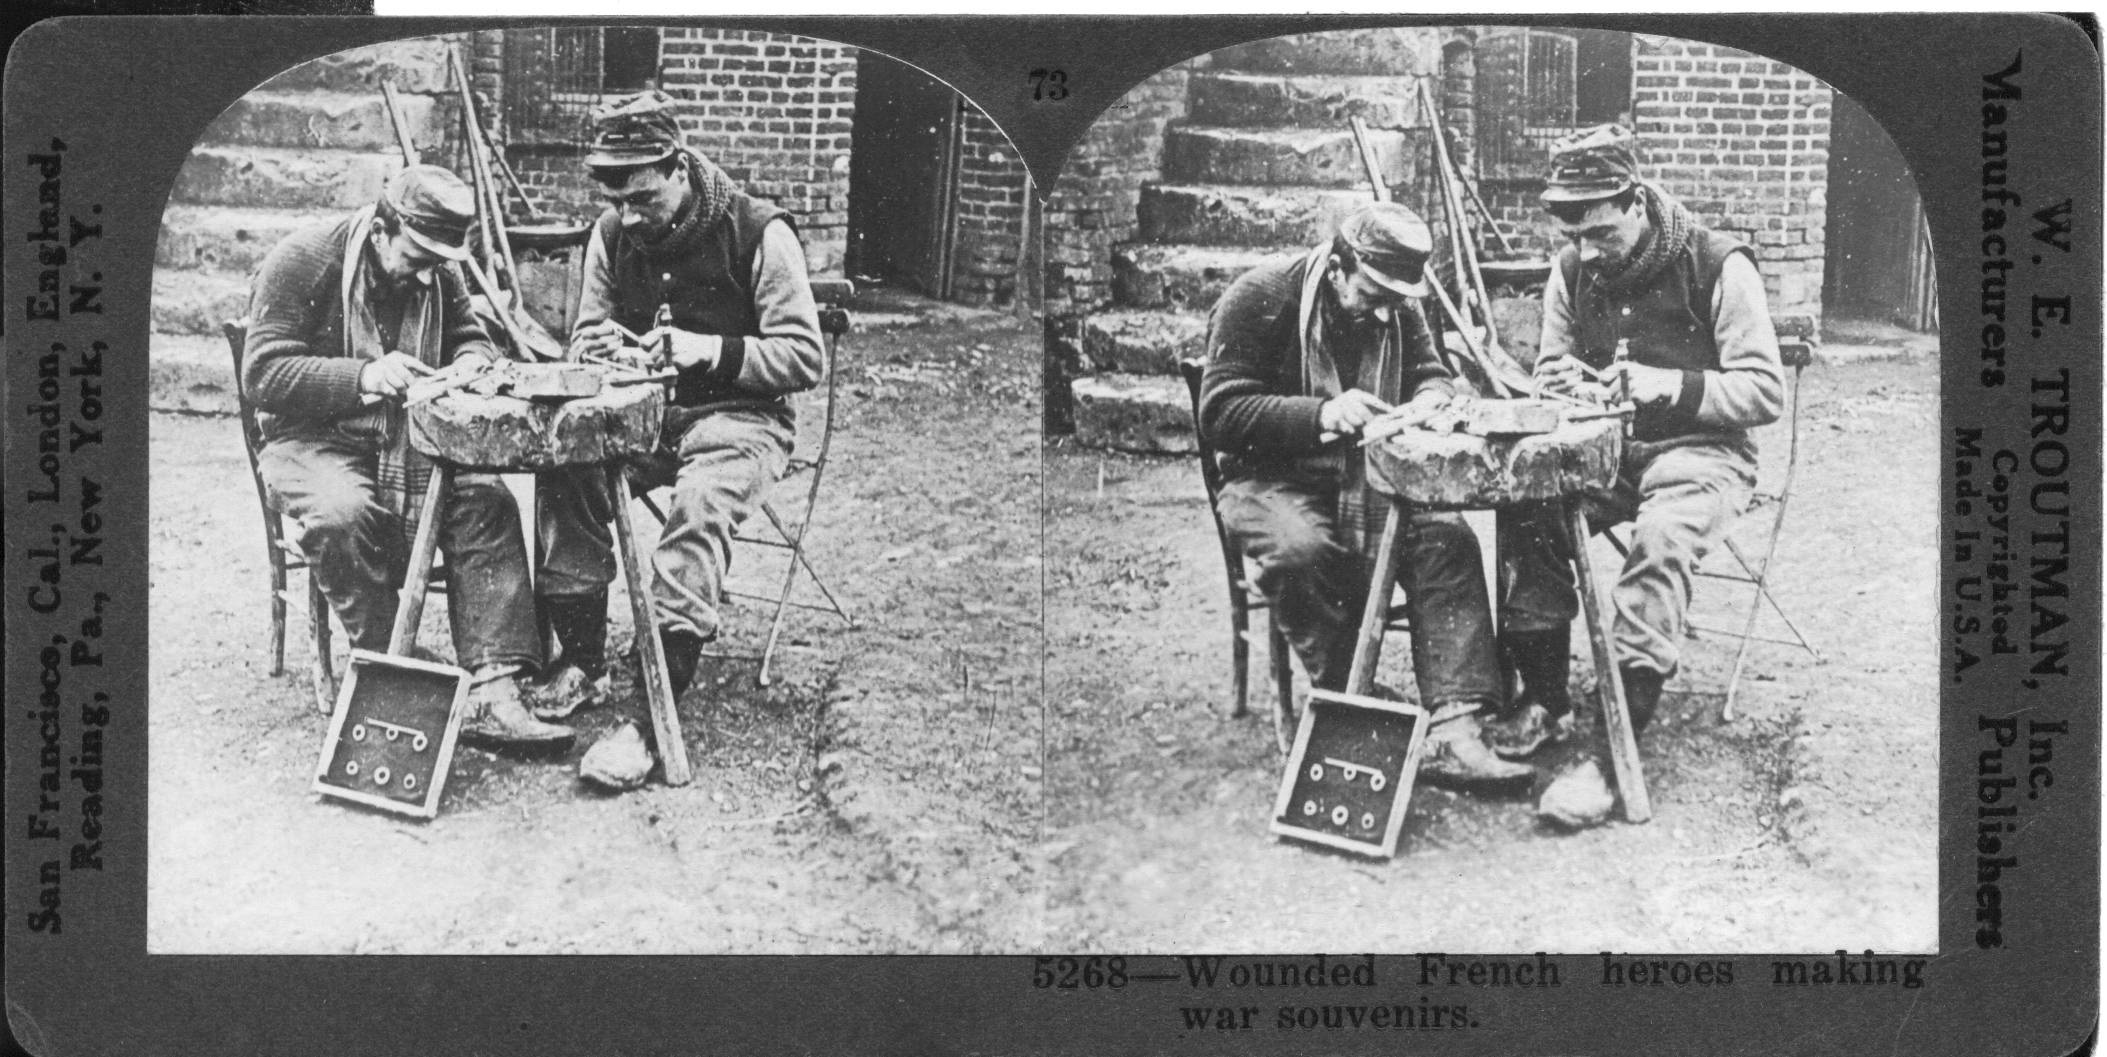 Wounded French heroes making war souvenirs